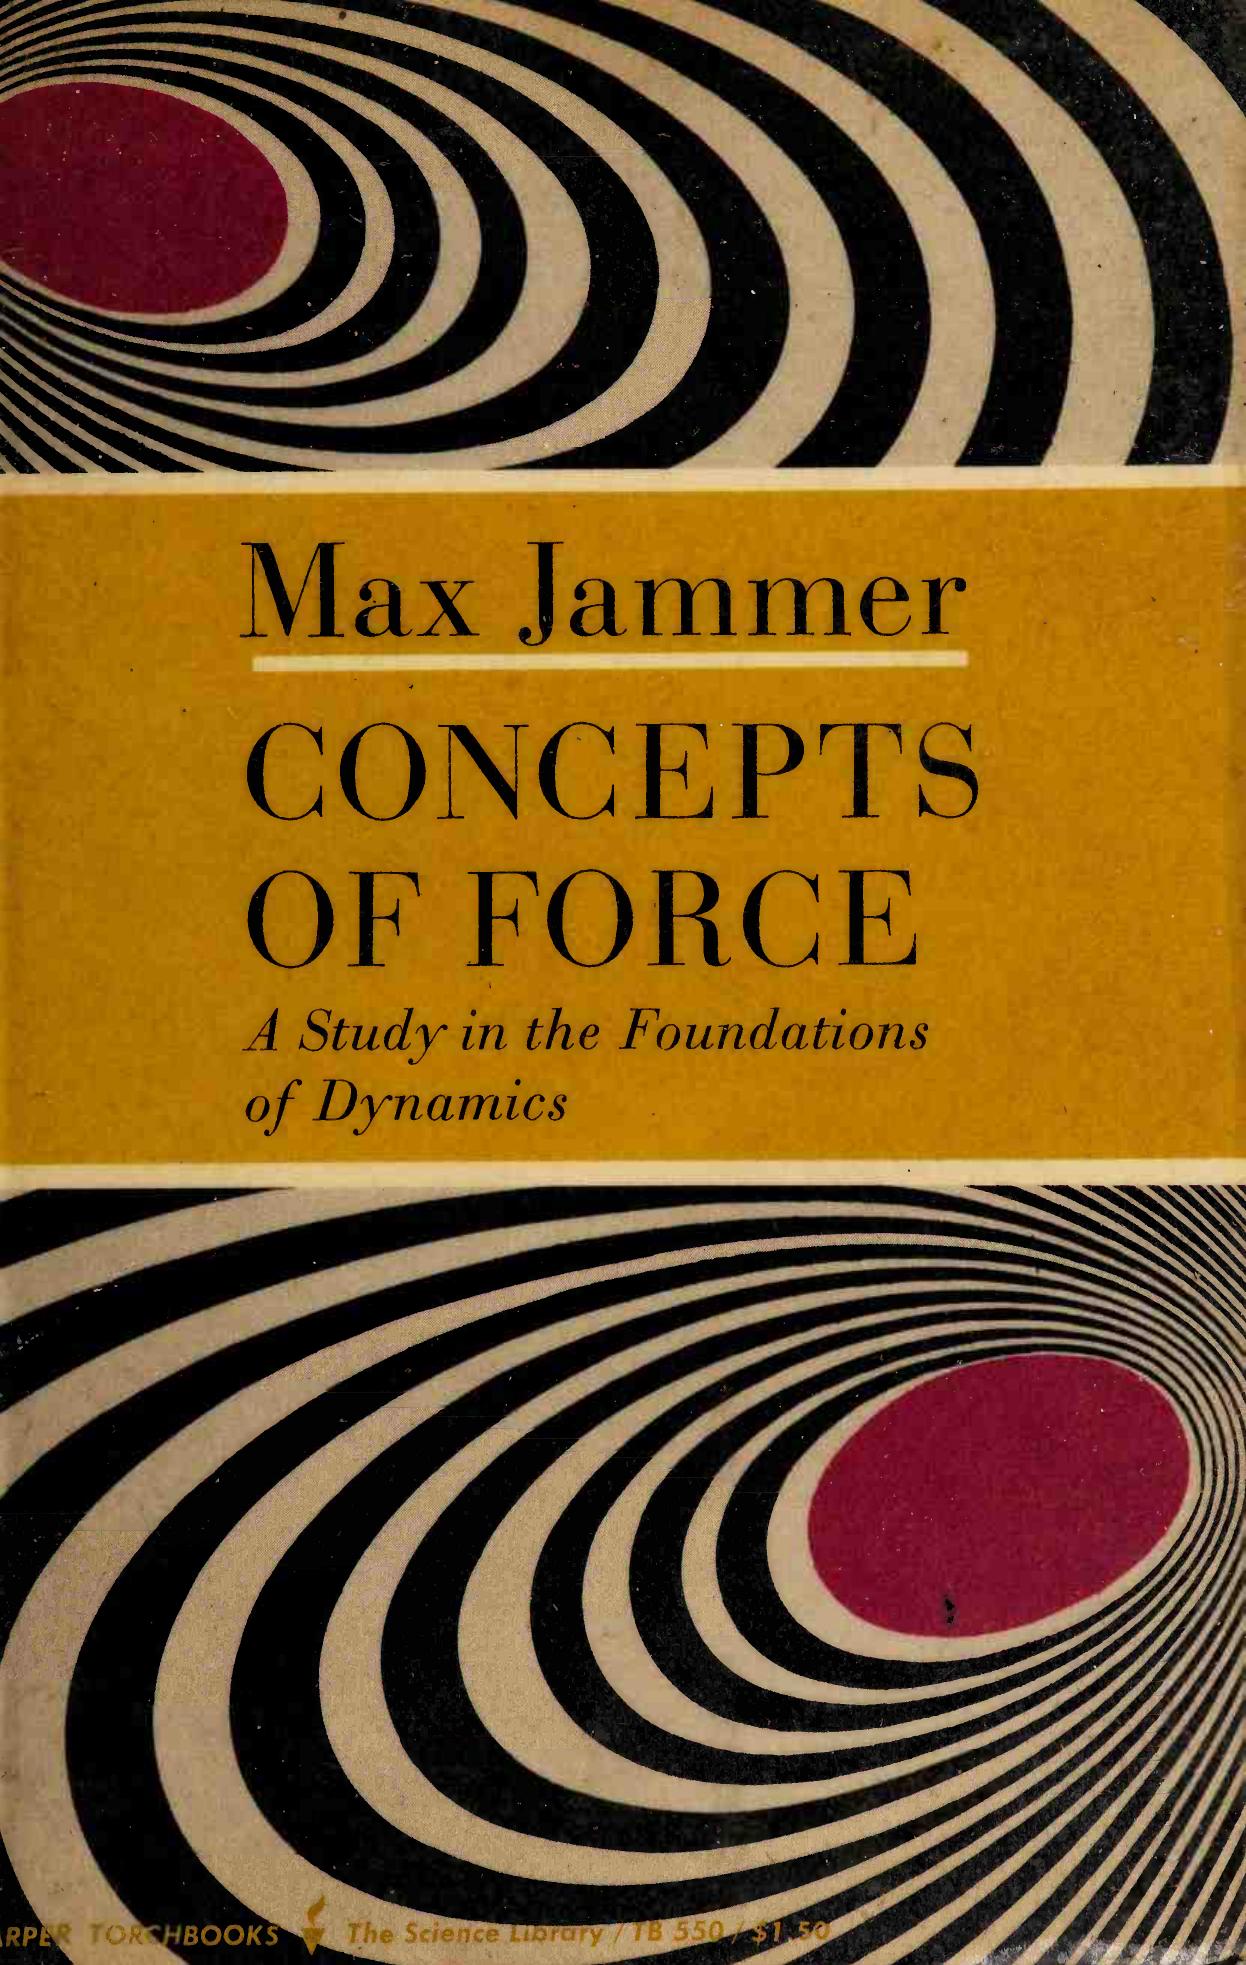 Concepts of Force (Dover Books on Physics) by Max Jammer